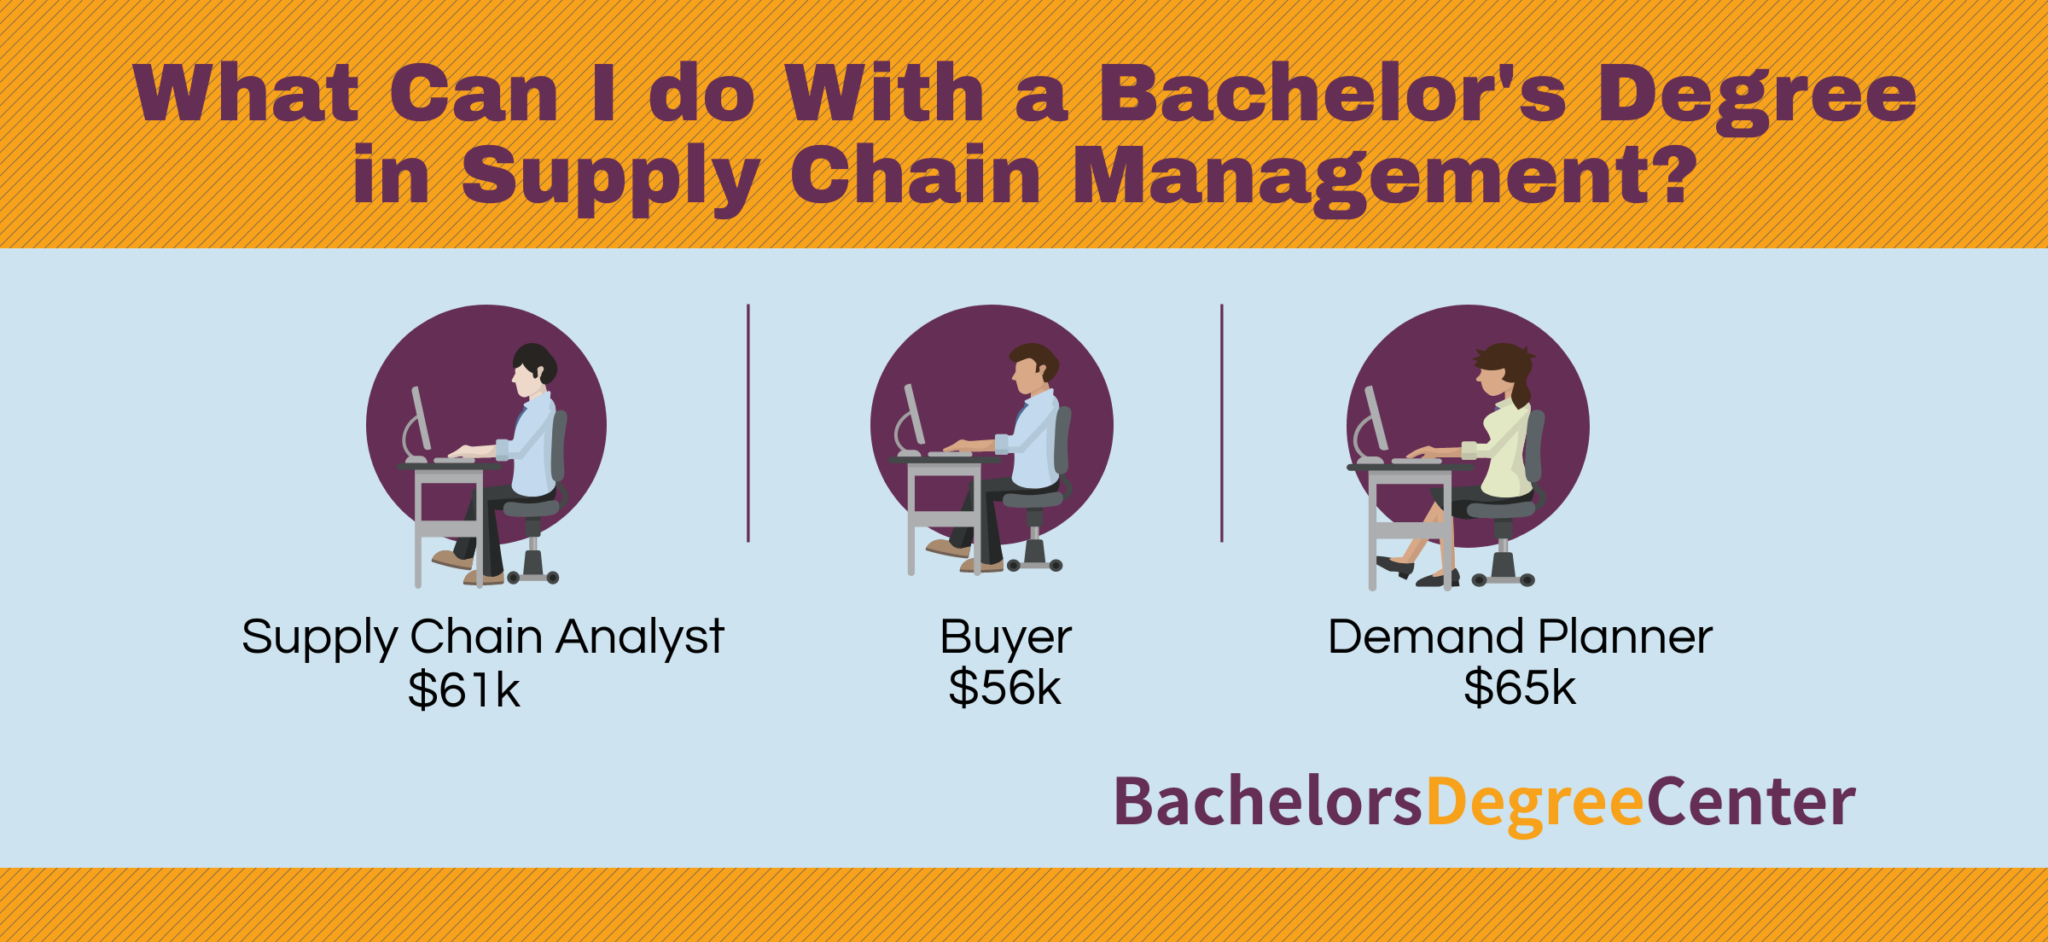 Jobs with supply chain management degree